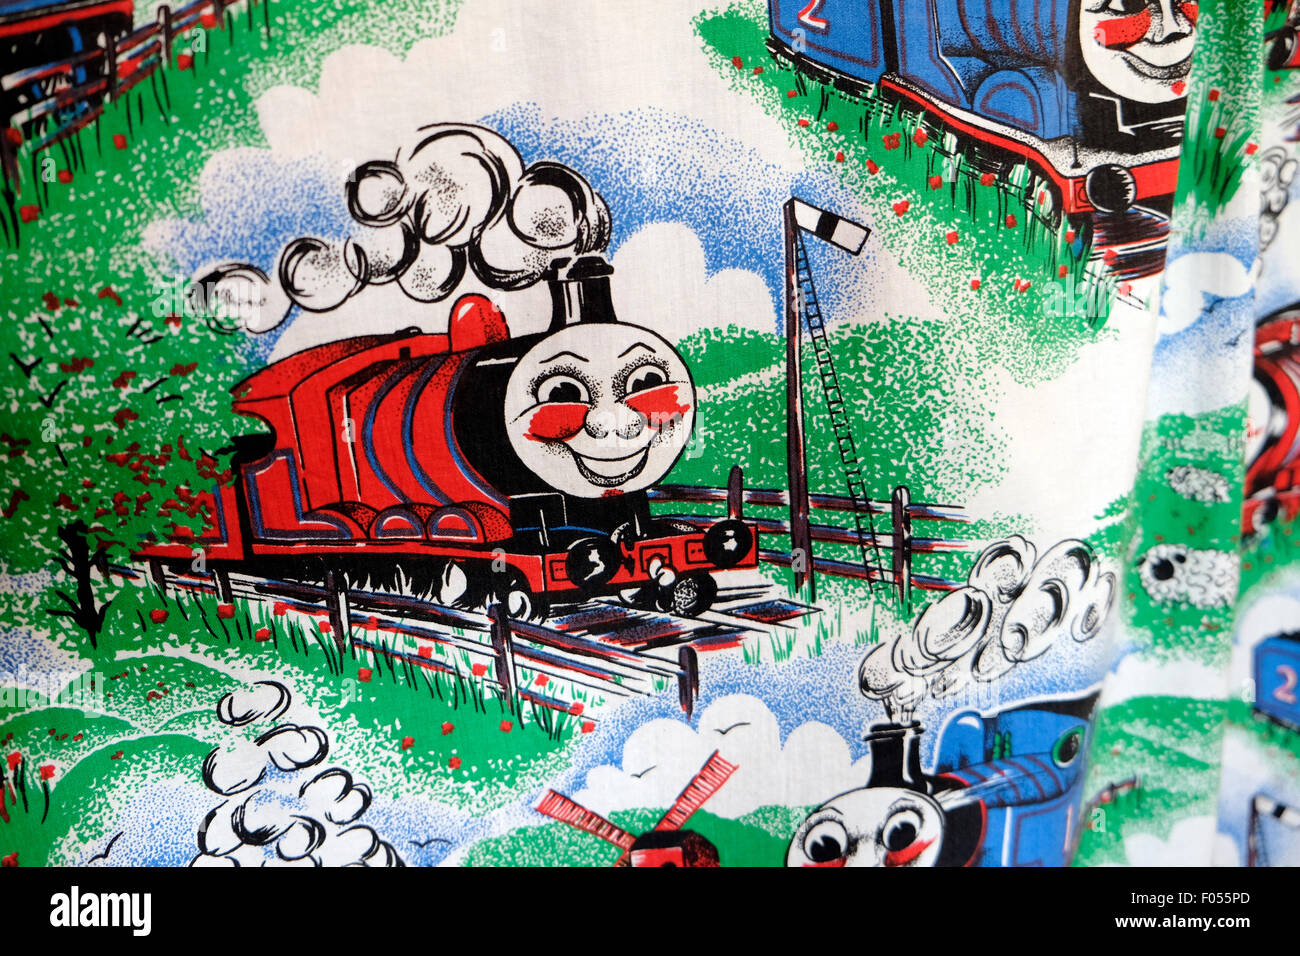 Children's illustration of James, one of the Thomas the Tank Engine steam train friends printed on fabric UK   KATHY DEWITT Stock Photo